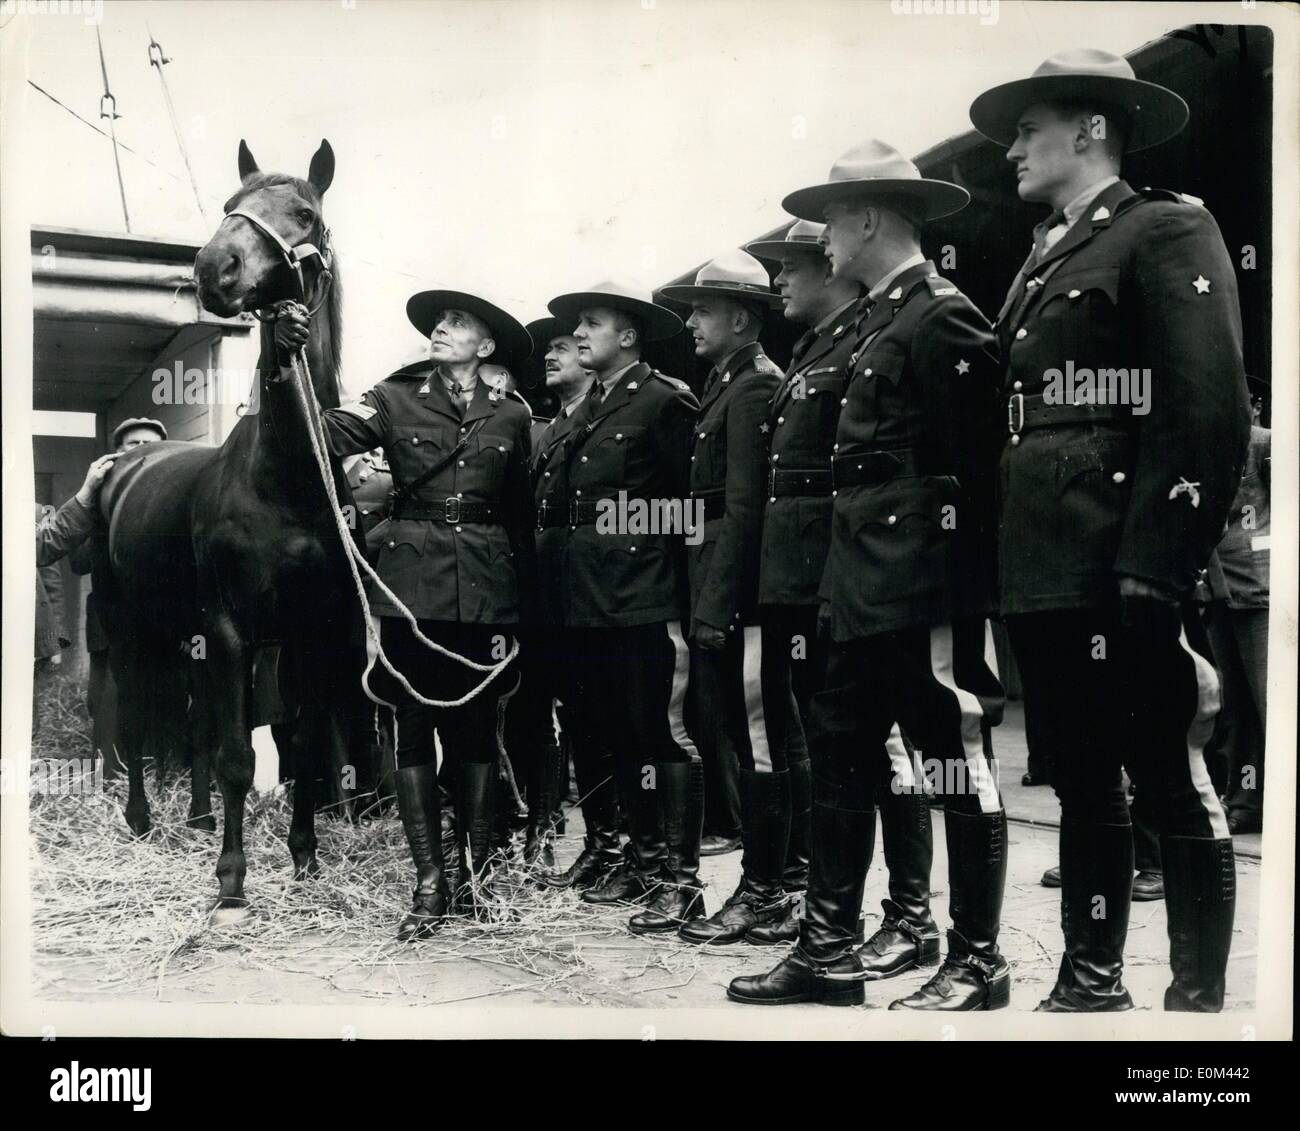 May 05, 1953 - The Mounties Go To Meet Their Horses.. Sgt. Jim Fahie Brings ''Eagle'' Ashore: Members of the Royal Canadian Mounted Police who arrived ion this country recently part in the Coronation Processions - today went to the Royal Albert Docks to meet their horses which arrived aboard the C.P.R. Vessel Beaverburn. Photo Shows Sgt. Jim Fahie of Ottawa leads out his mount ''Eagle'' from the sling - while his colleagues await the lending of their mounts at the Docks this afternoon. Stock Photo